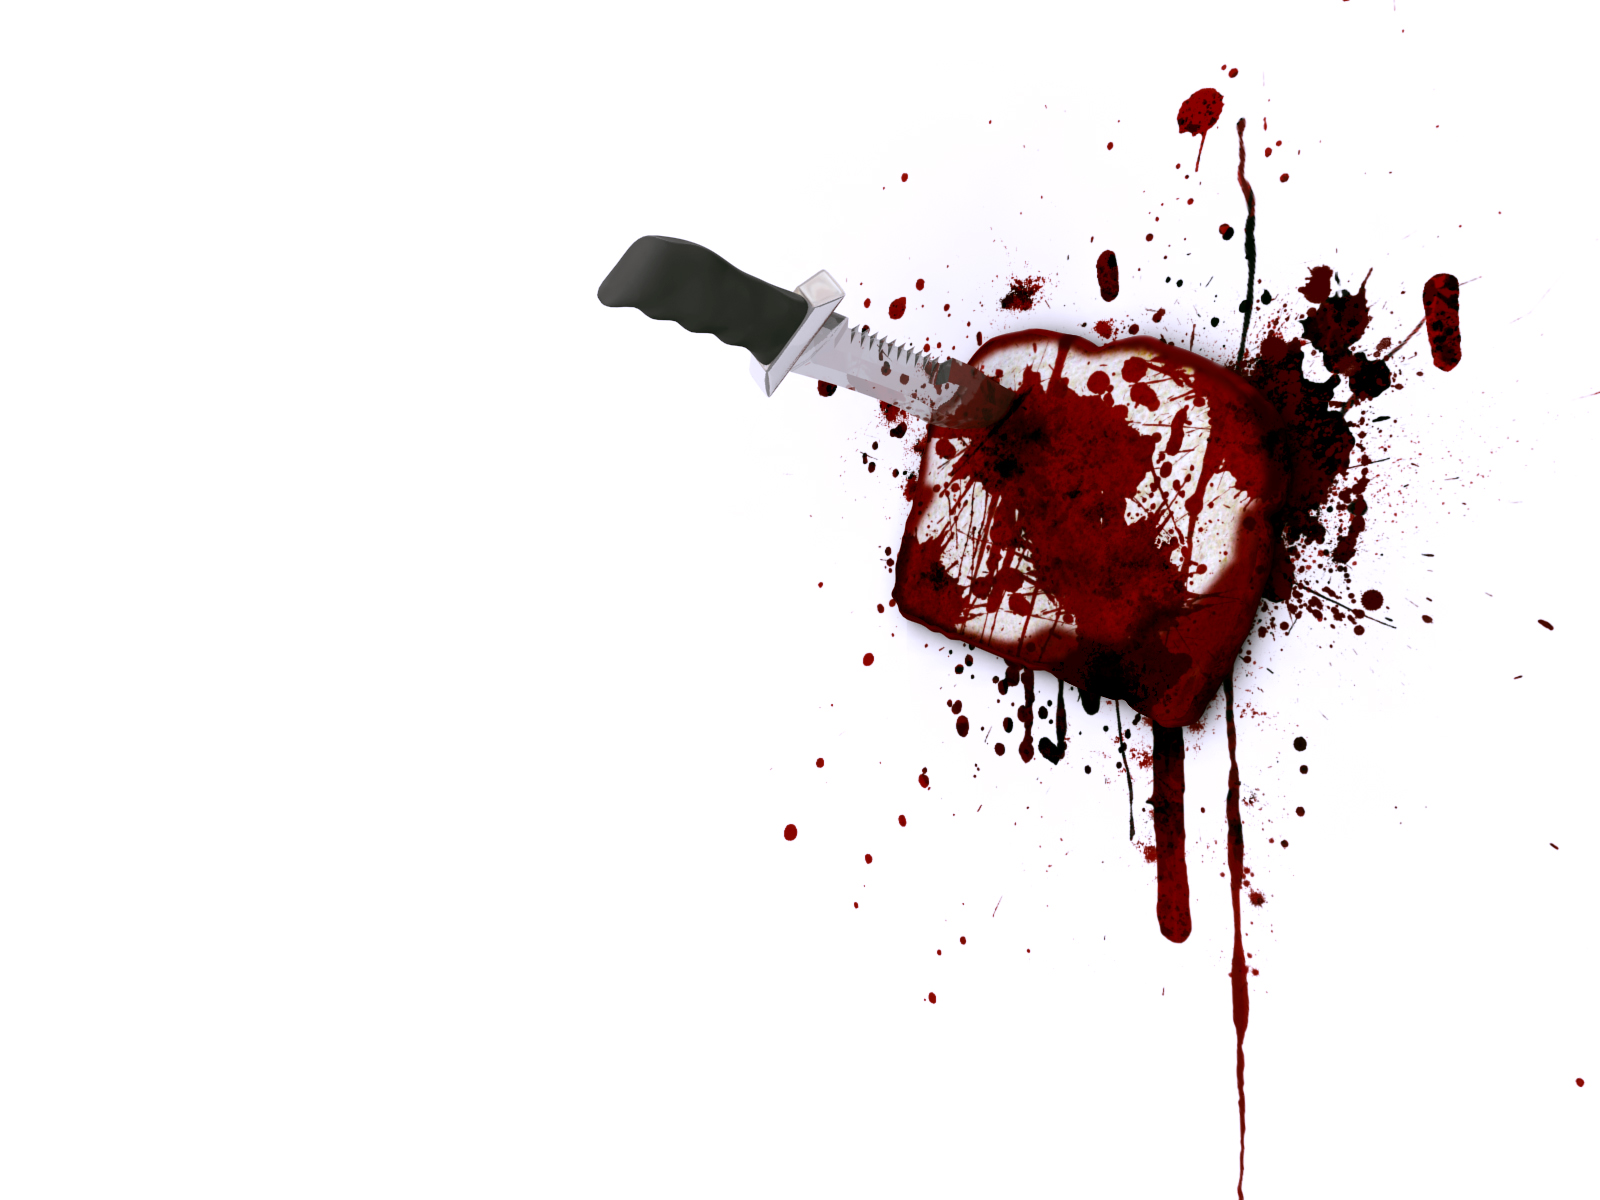 Knife And Blood Wallpaper Image